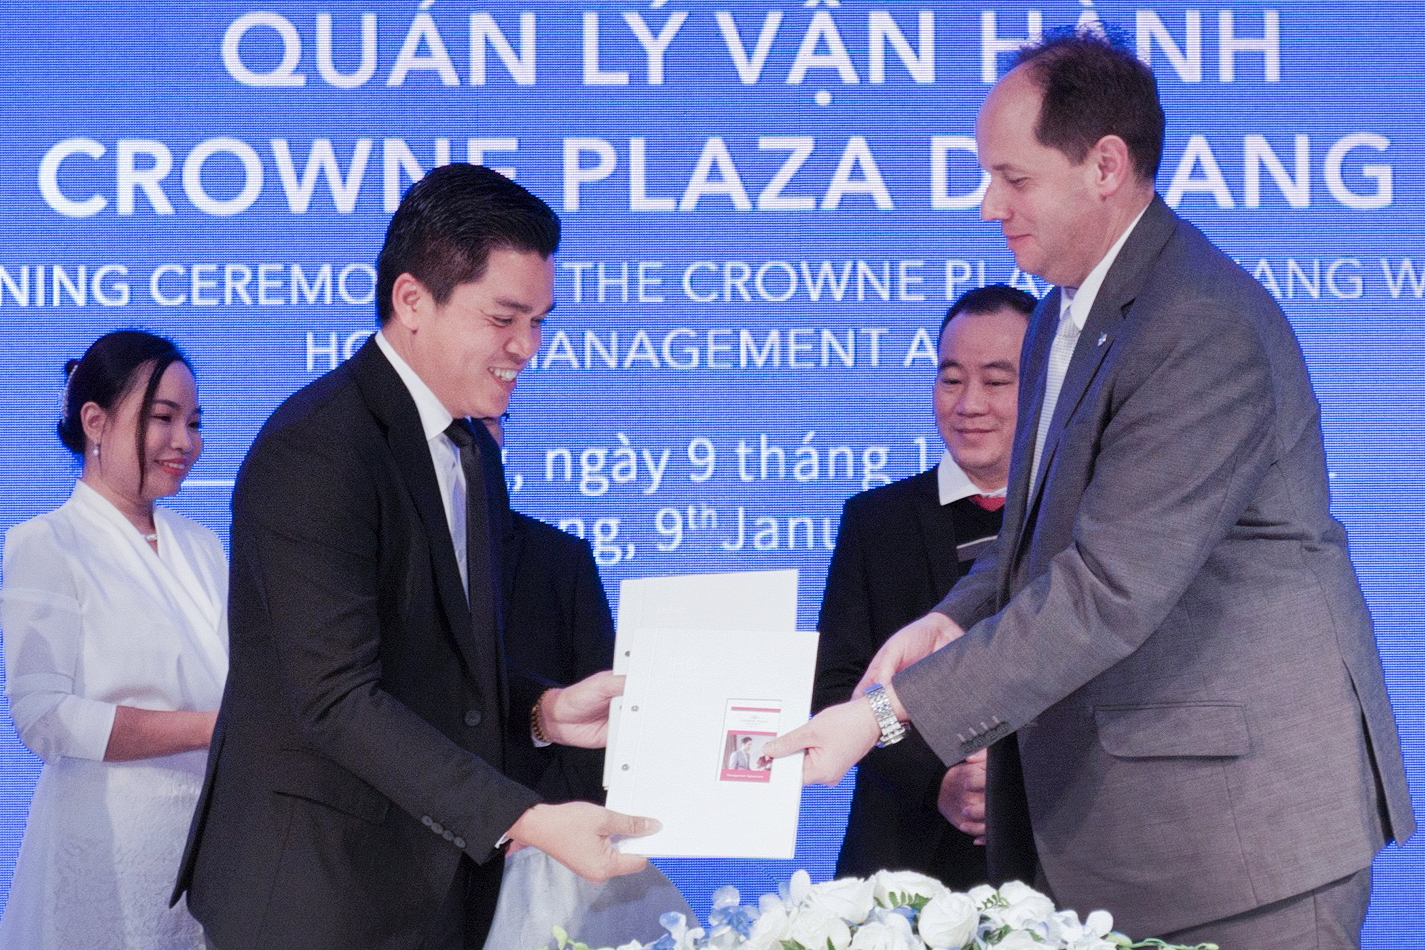 InterContinental Hotels Group has signed a management agreement with Minh Dong Travel, a member of PGT Group, to open a second Crowne Plaza hotel in Danang. Click to enlarge.